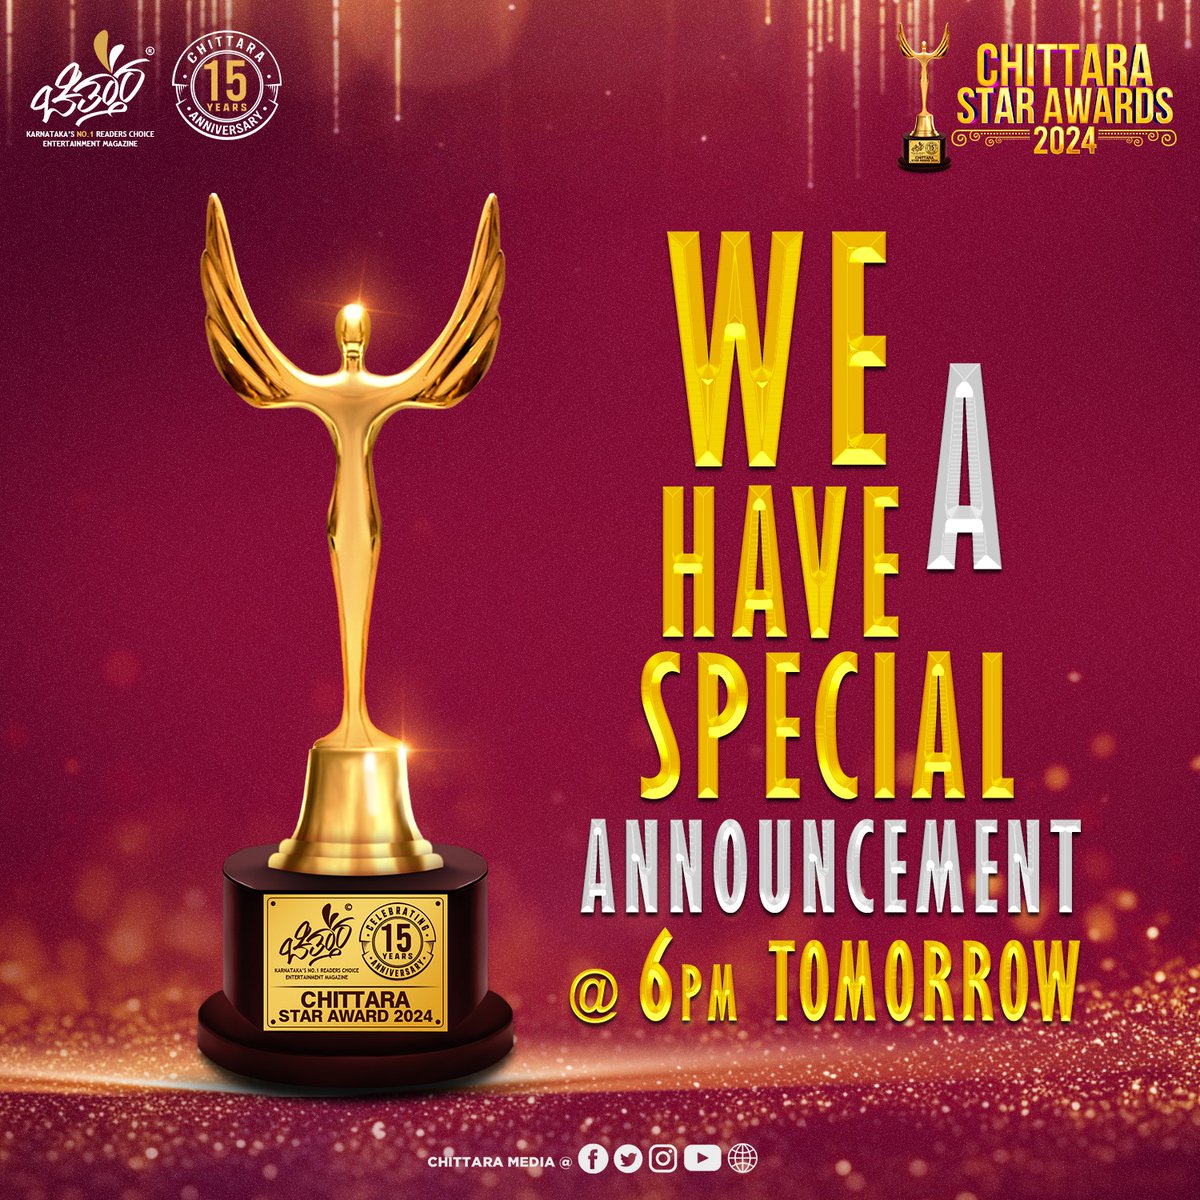 We have special announcement tomorrow! Can you guess what it is? 👀 Stay Tuned for More updates #ChittaraStarAwards2024 #ChittaraStarAwards #Chittara